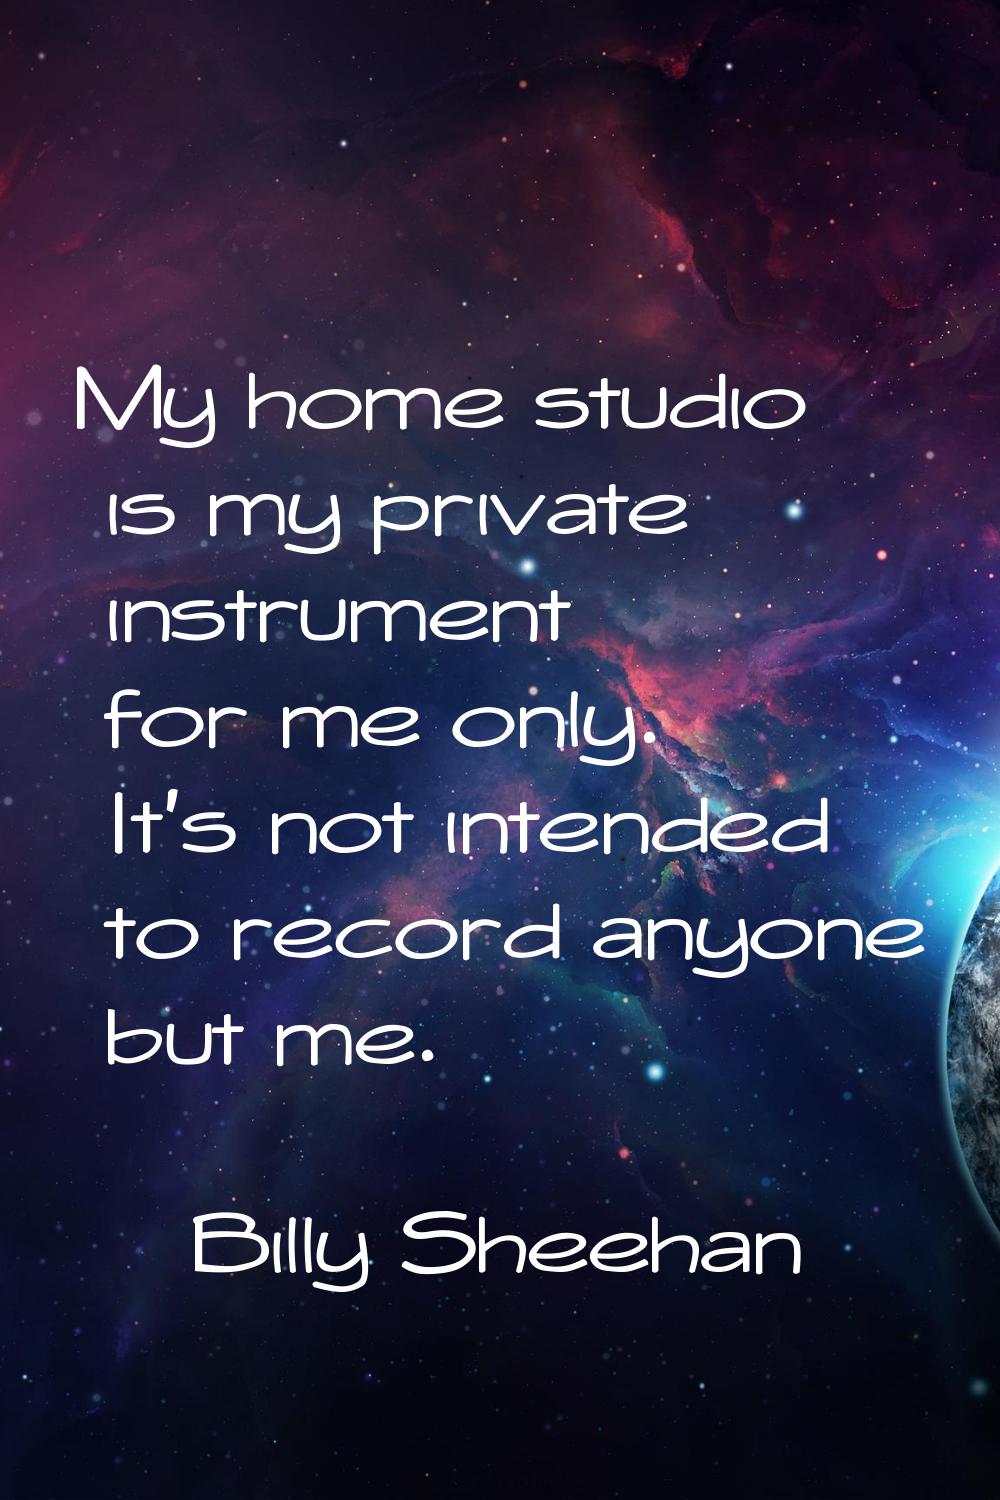 My home studio is my private instrument for me only. It's not intended to record anyone but me.